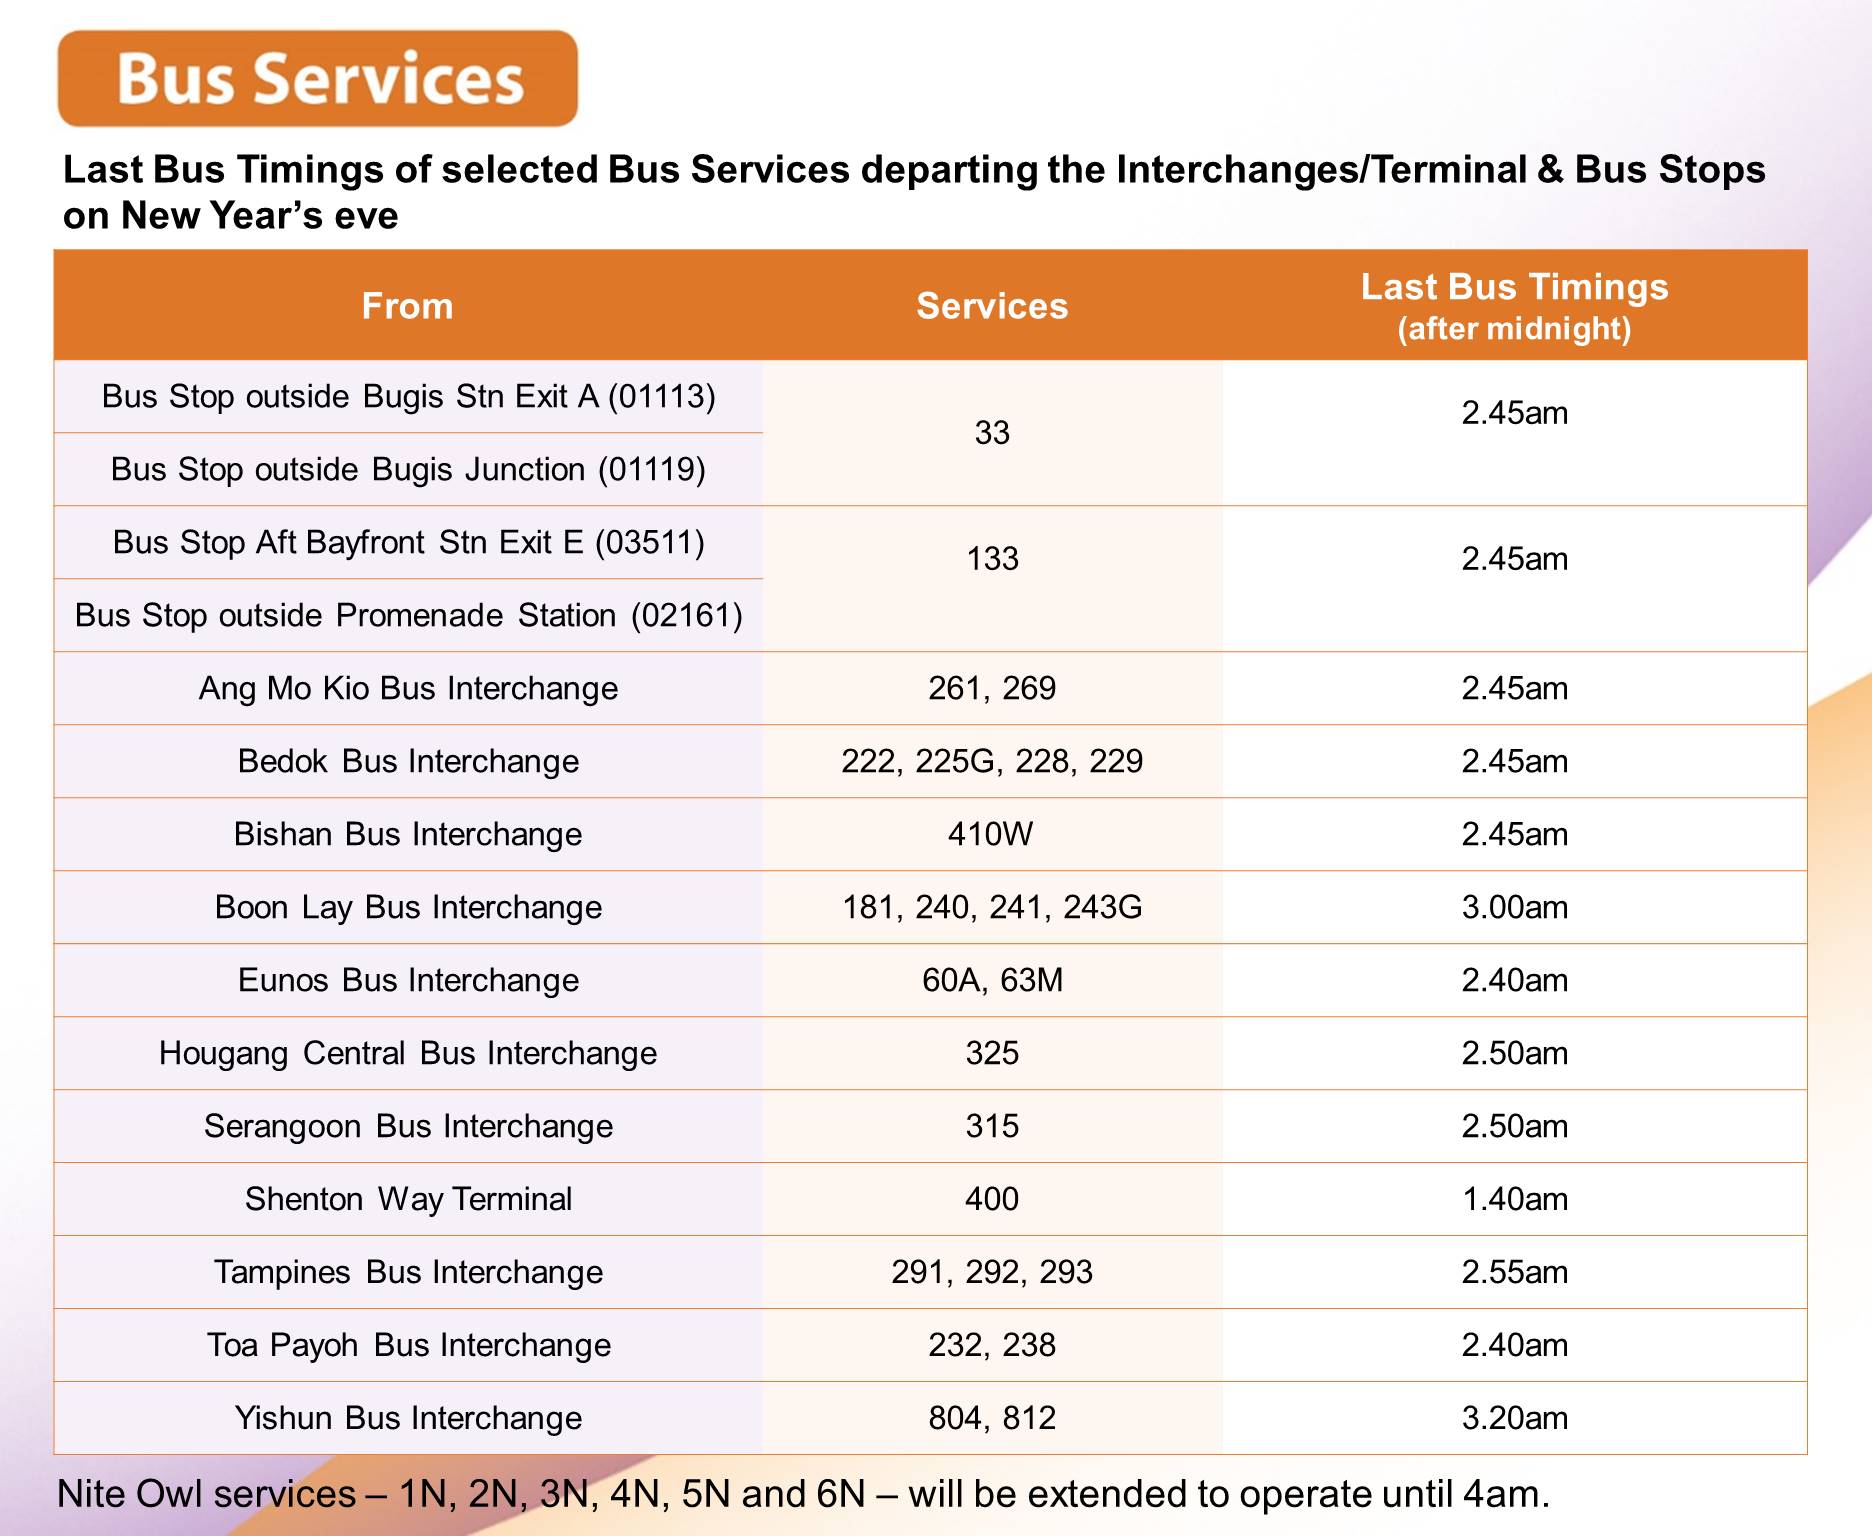 Bus services last bus timing New Year's Eve 2019 2020